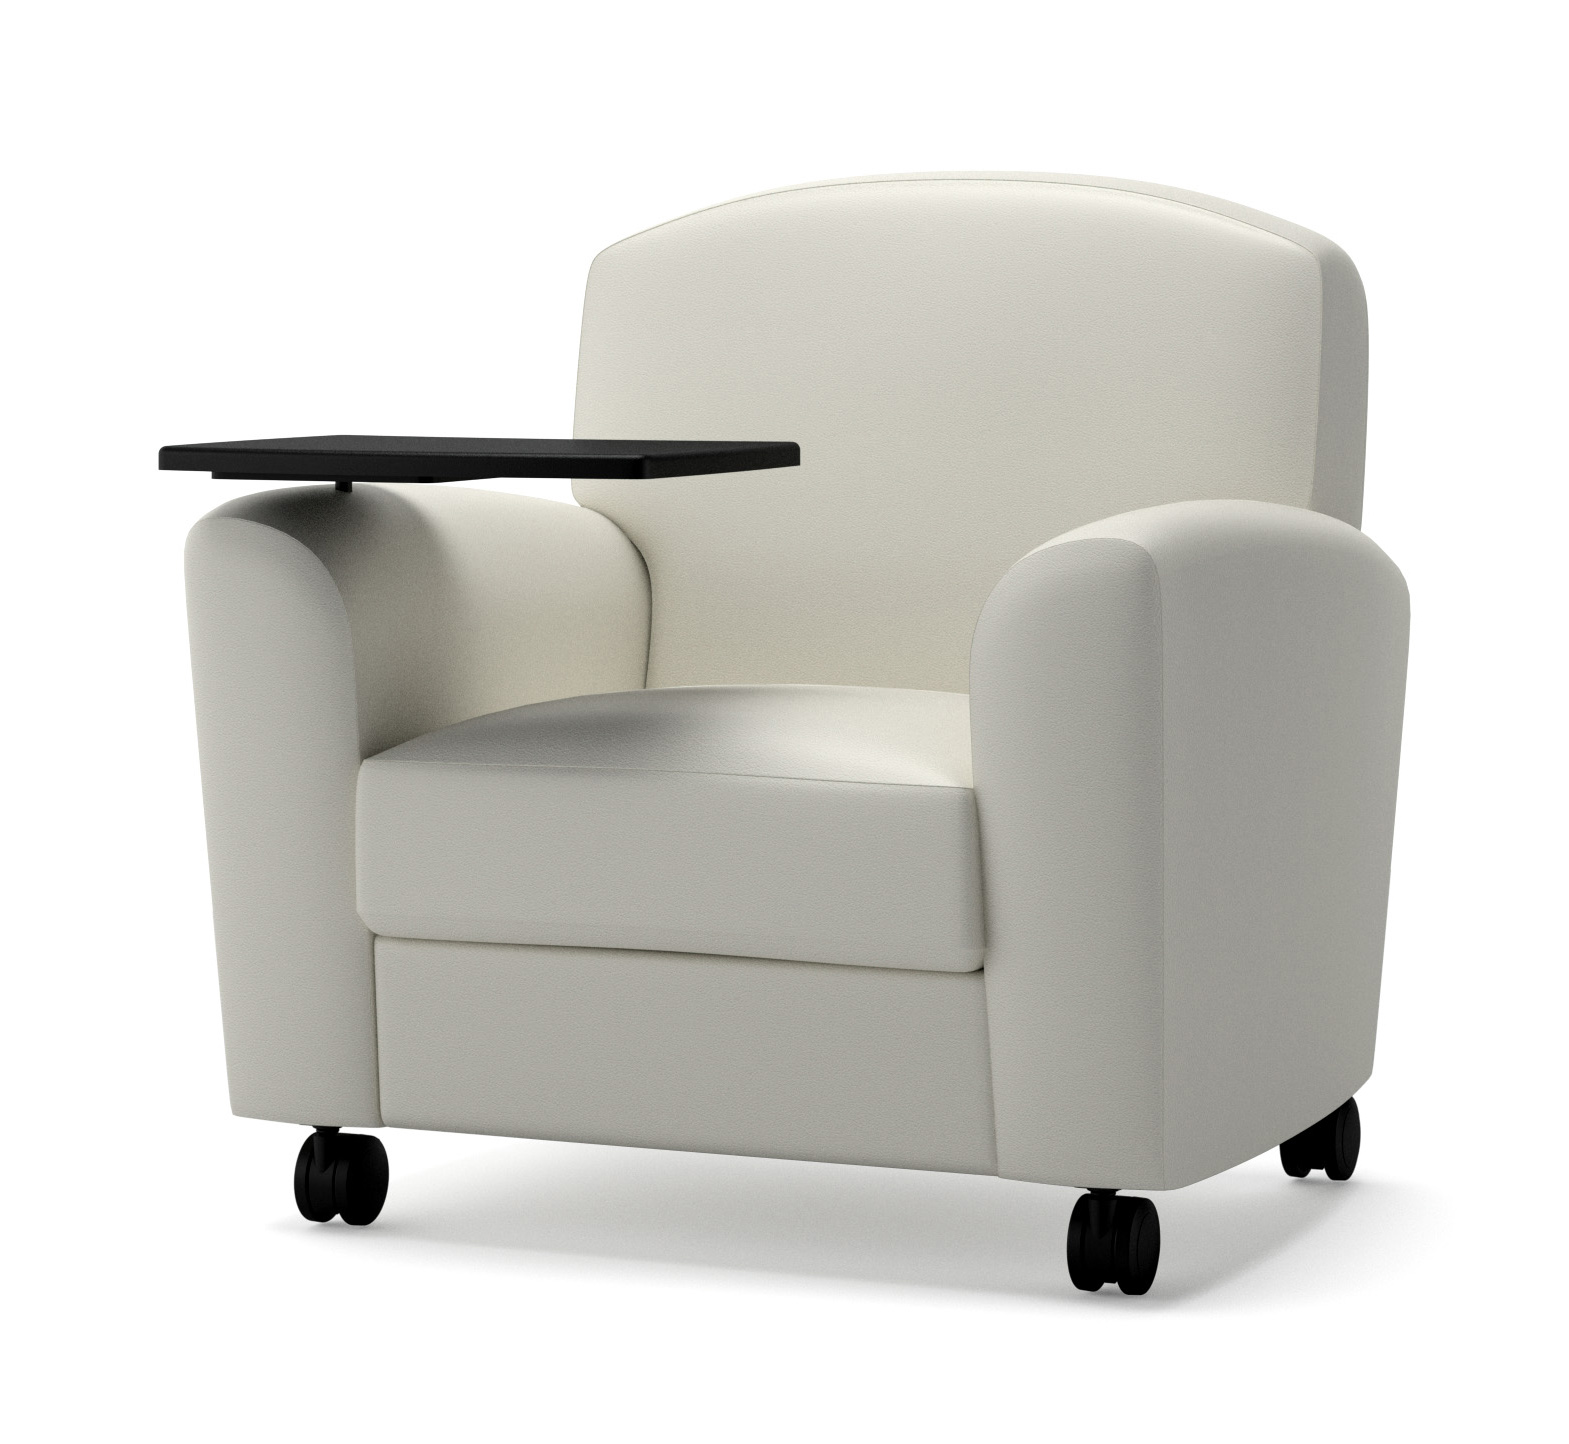 Flair Chair with Tablet Arm, Casters